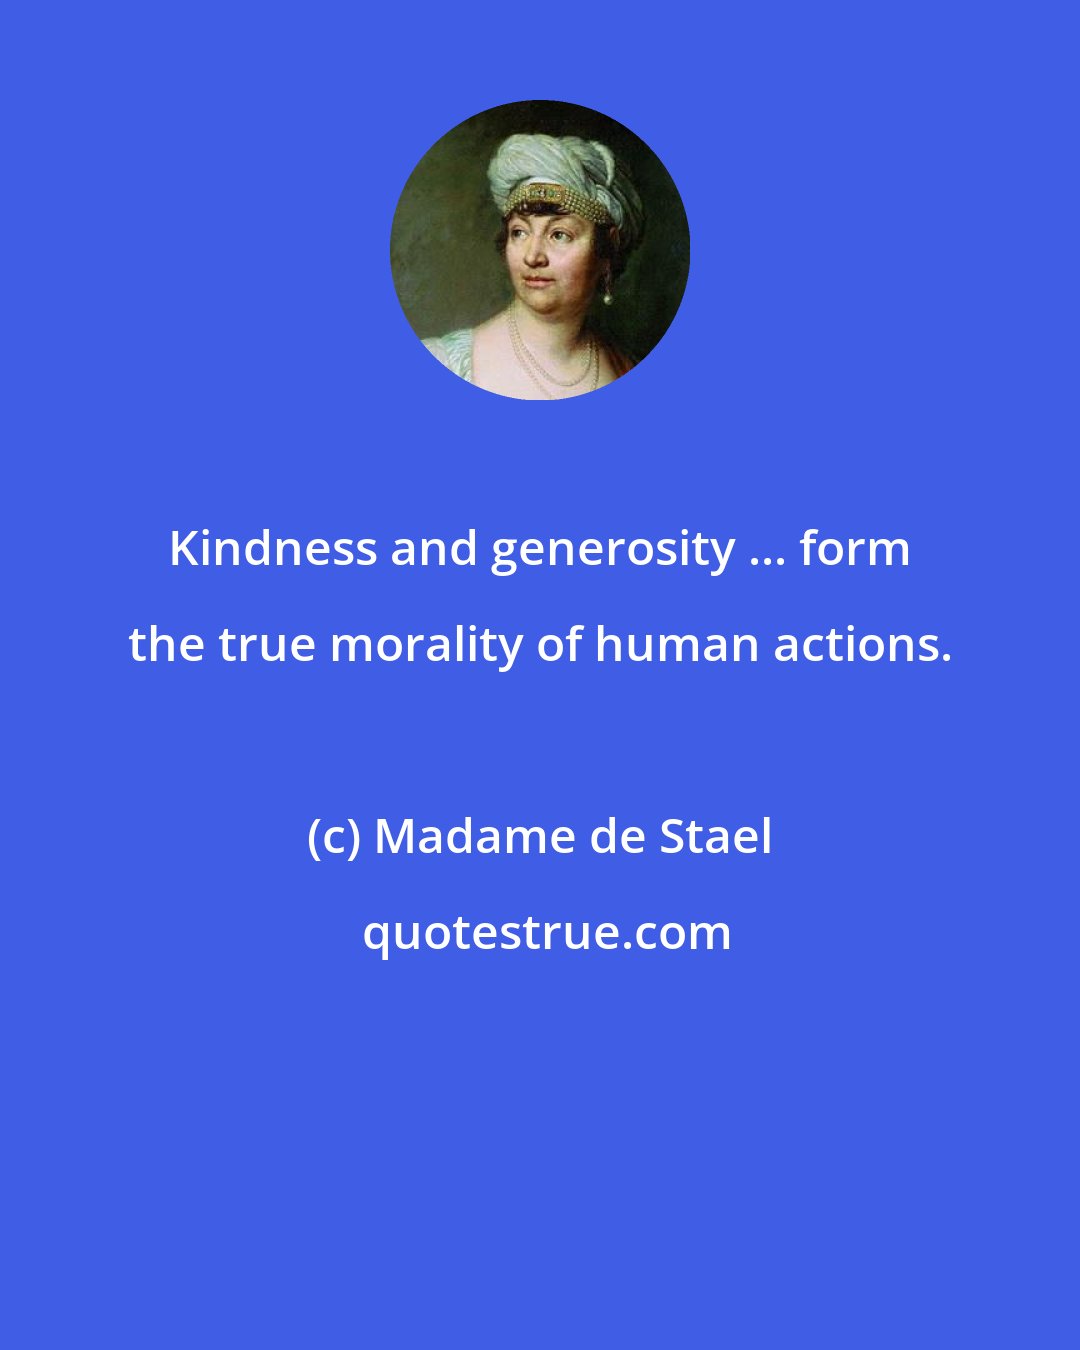 Madame de Stael: Kindness and generosity ... form the true morality of human actions.